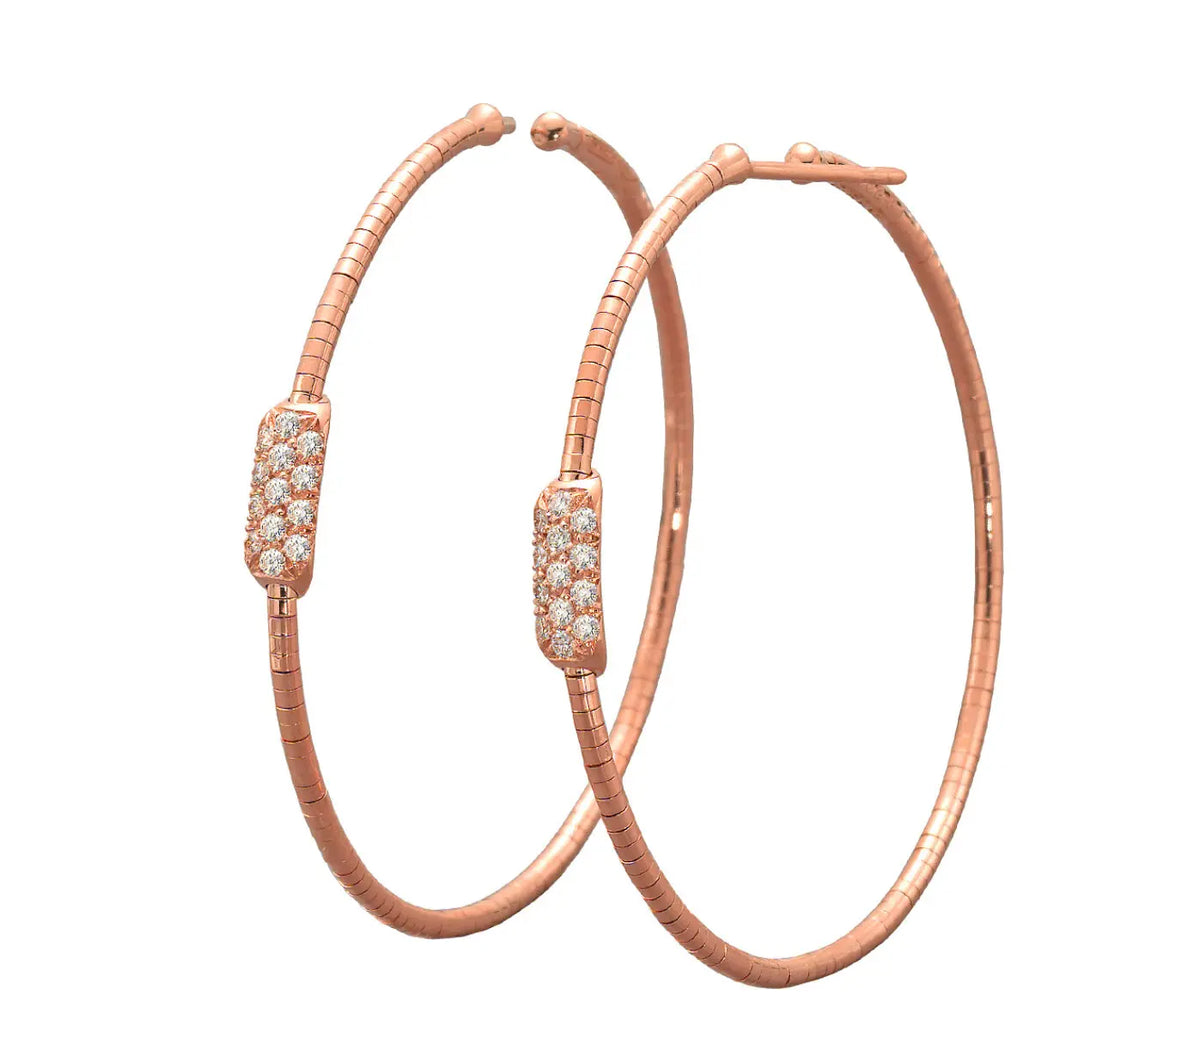 18K Rose Gold Hoop Earrings with .27ct Pave Diamonds   Length: 2 inches  Designed by Mattia Cielo and made in Italy